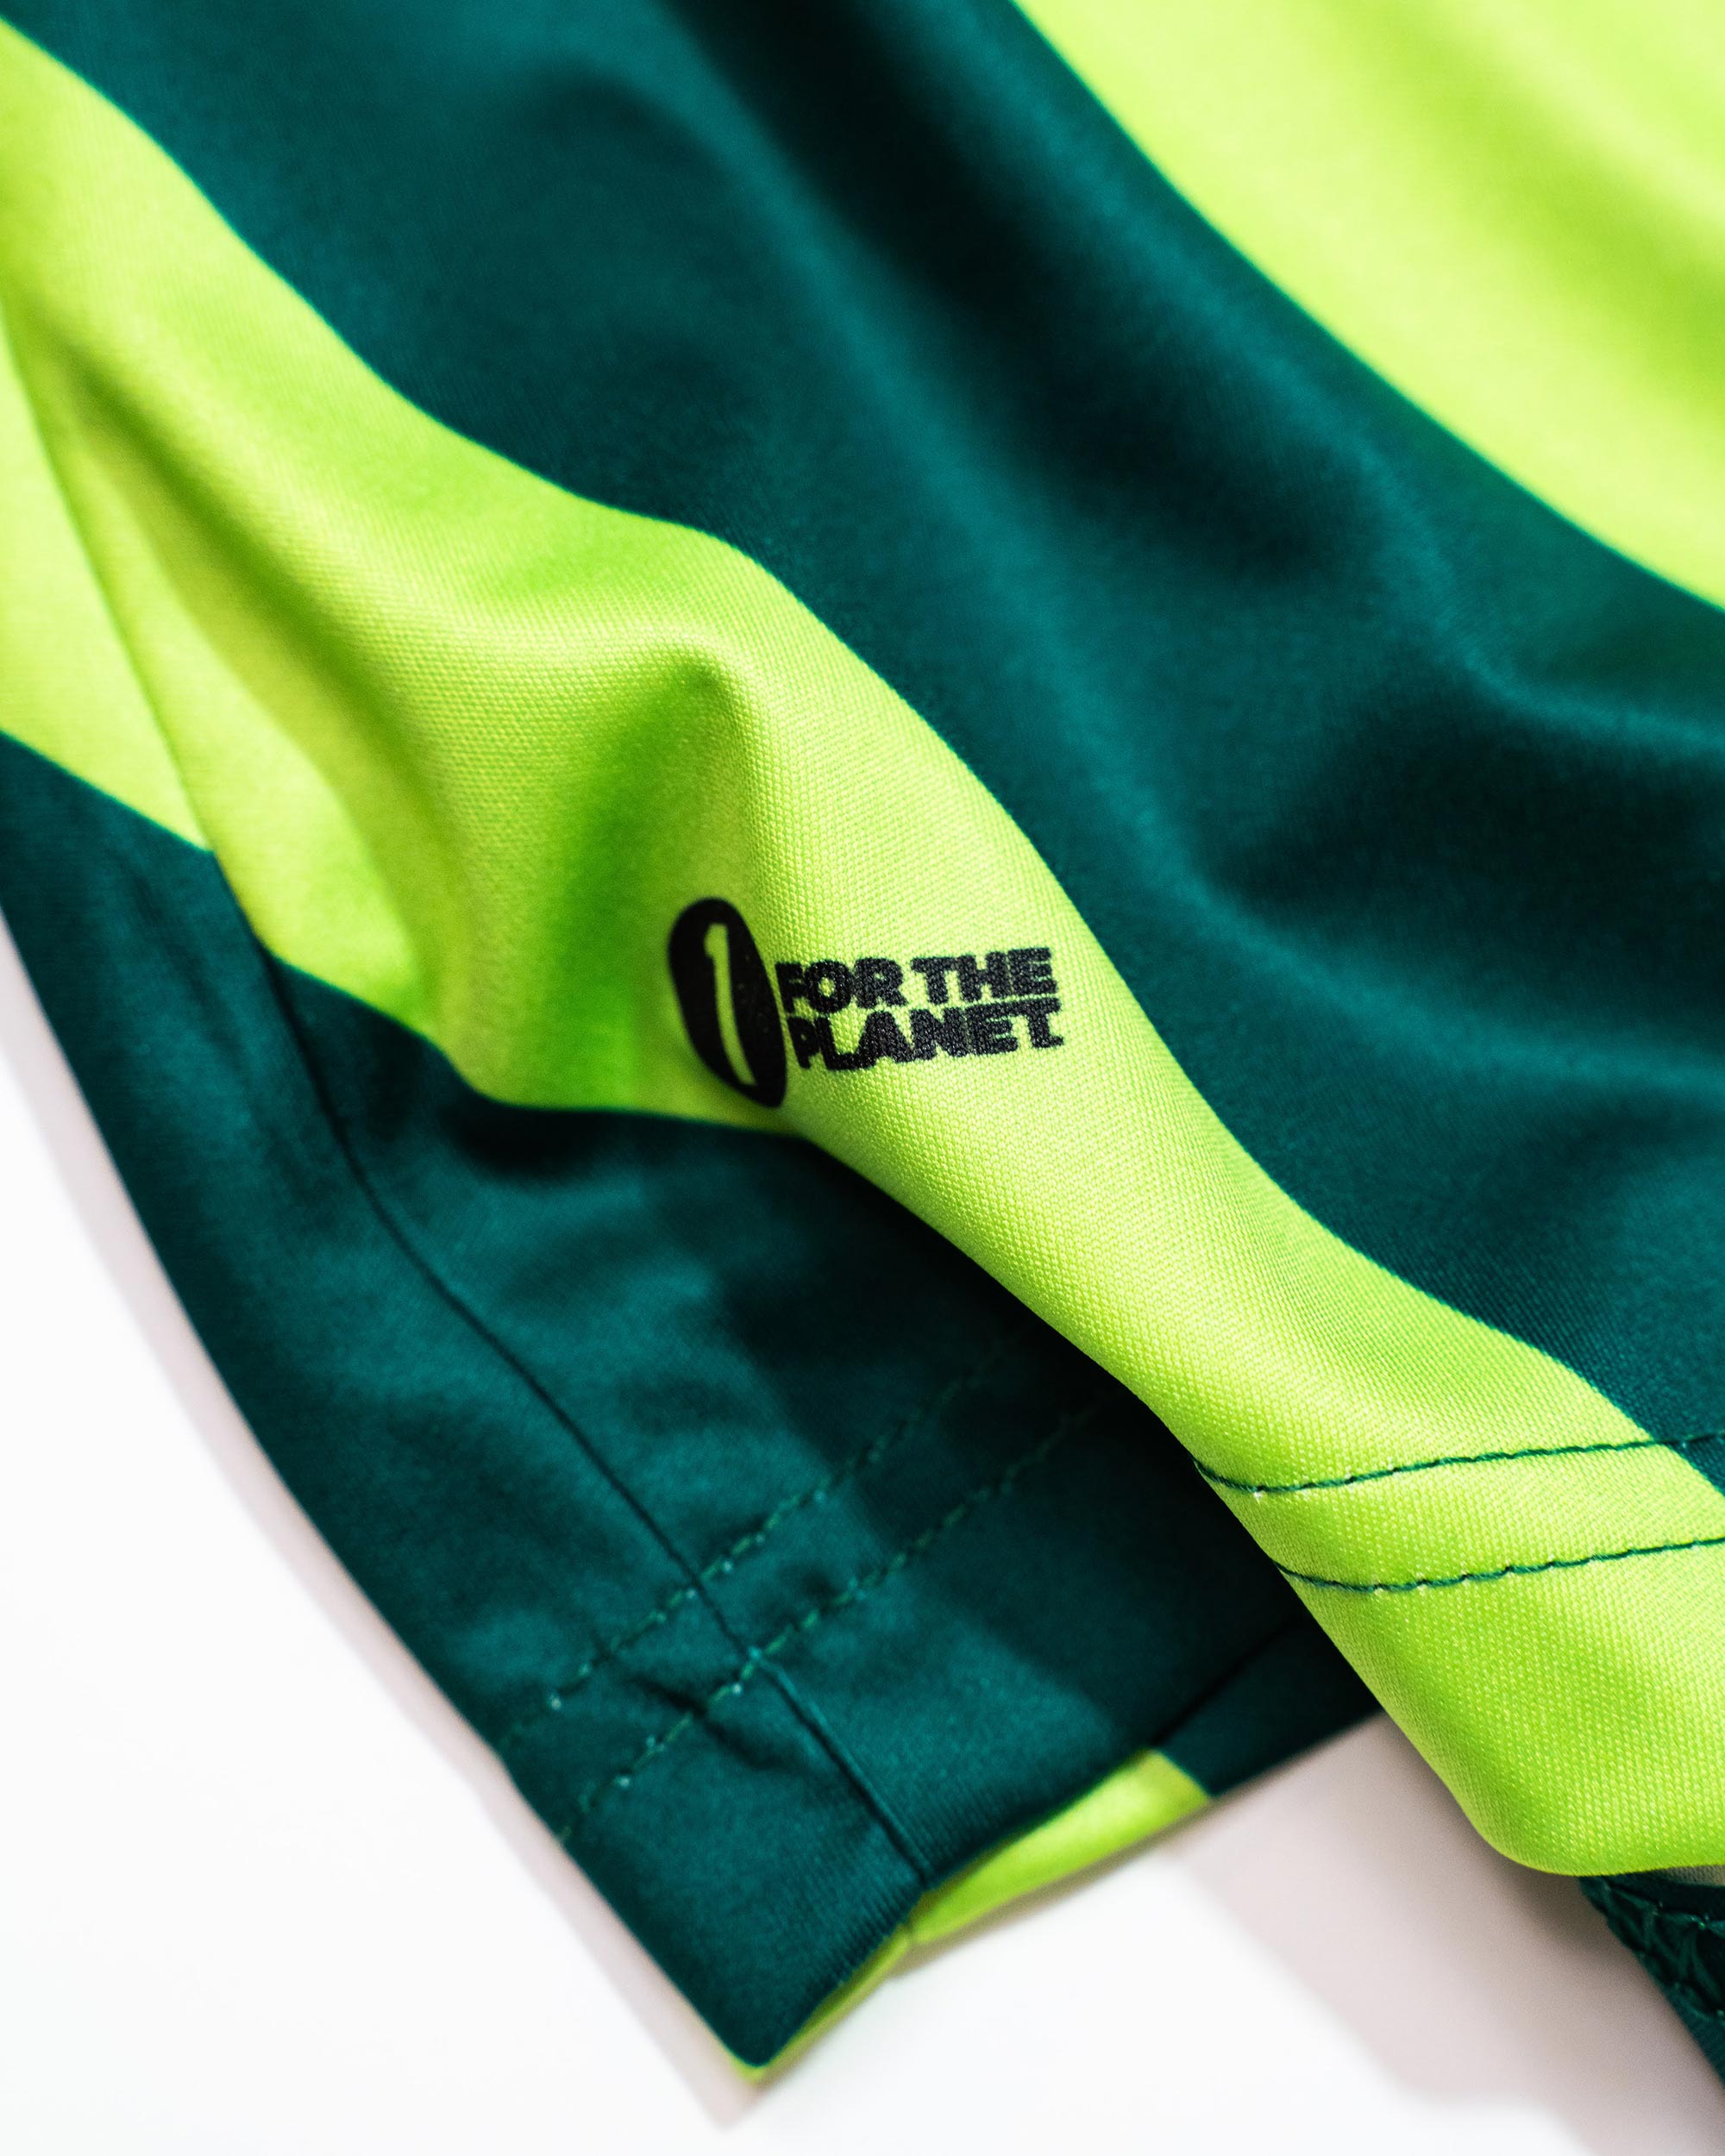 Vermont Green FC Unveils 'Electric Pine' Kit - Vermont Green Football Club